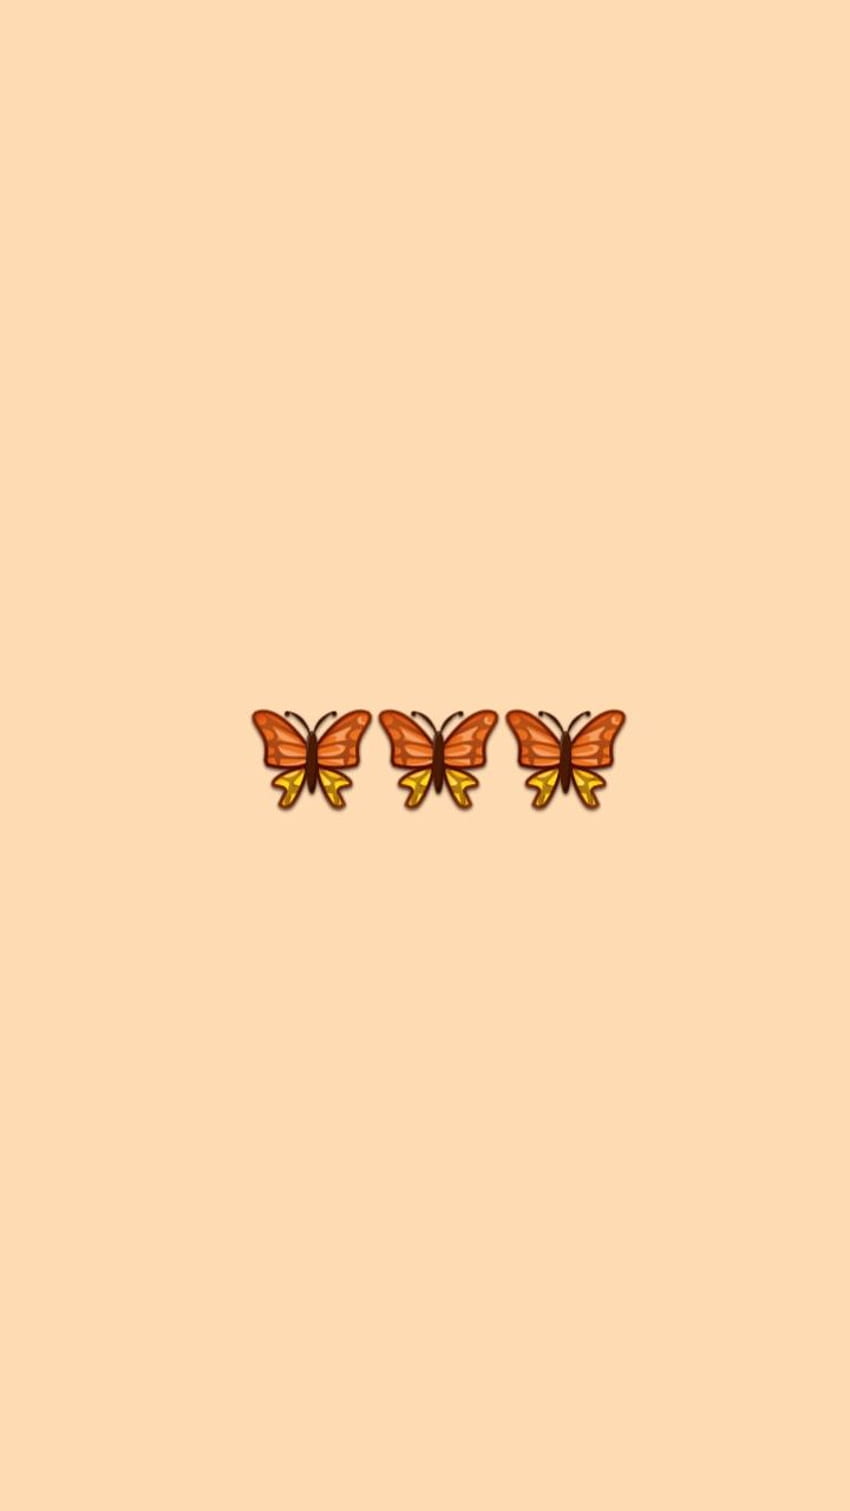 Aesthetic butterfly wallpaper for phone background. - Peach